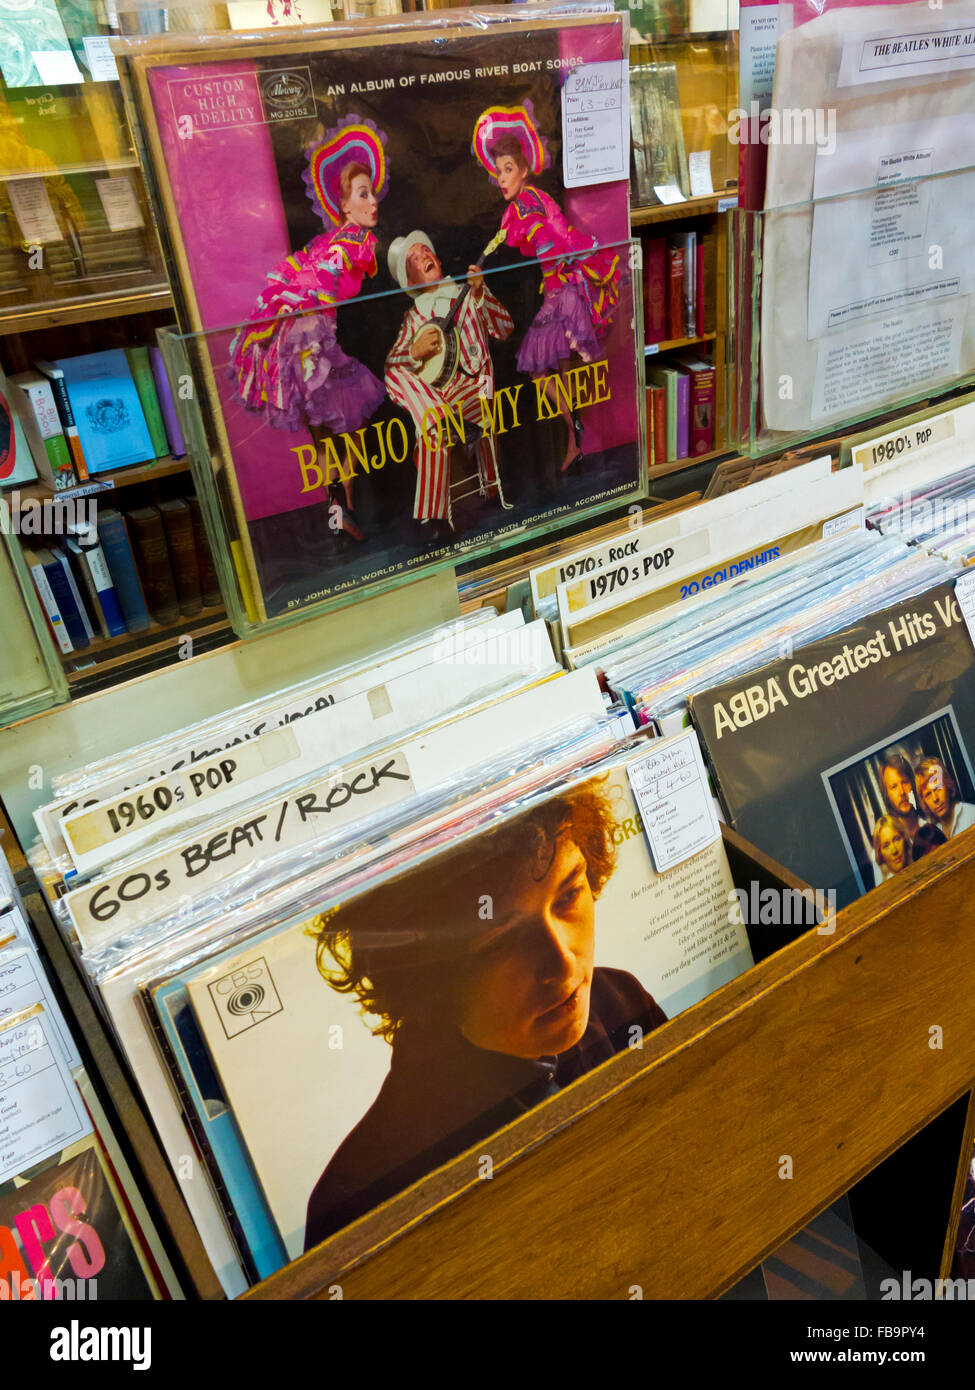 Secondhand vinyl records for sale in a shop with albums by Bob Dylan and  Abba visible in the racks Stock Photo - Alamy